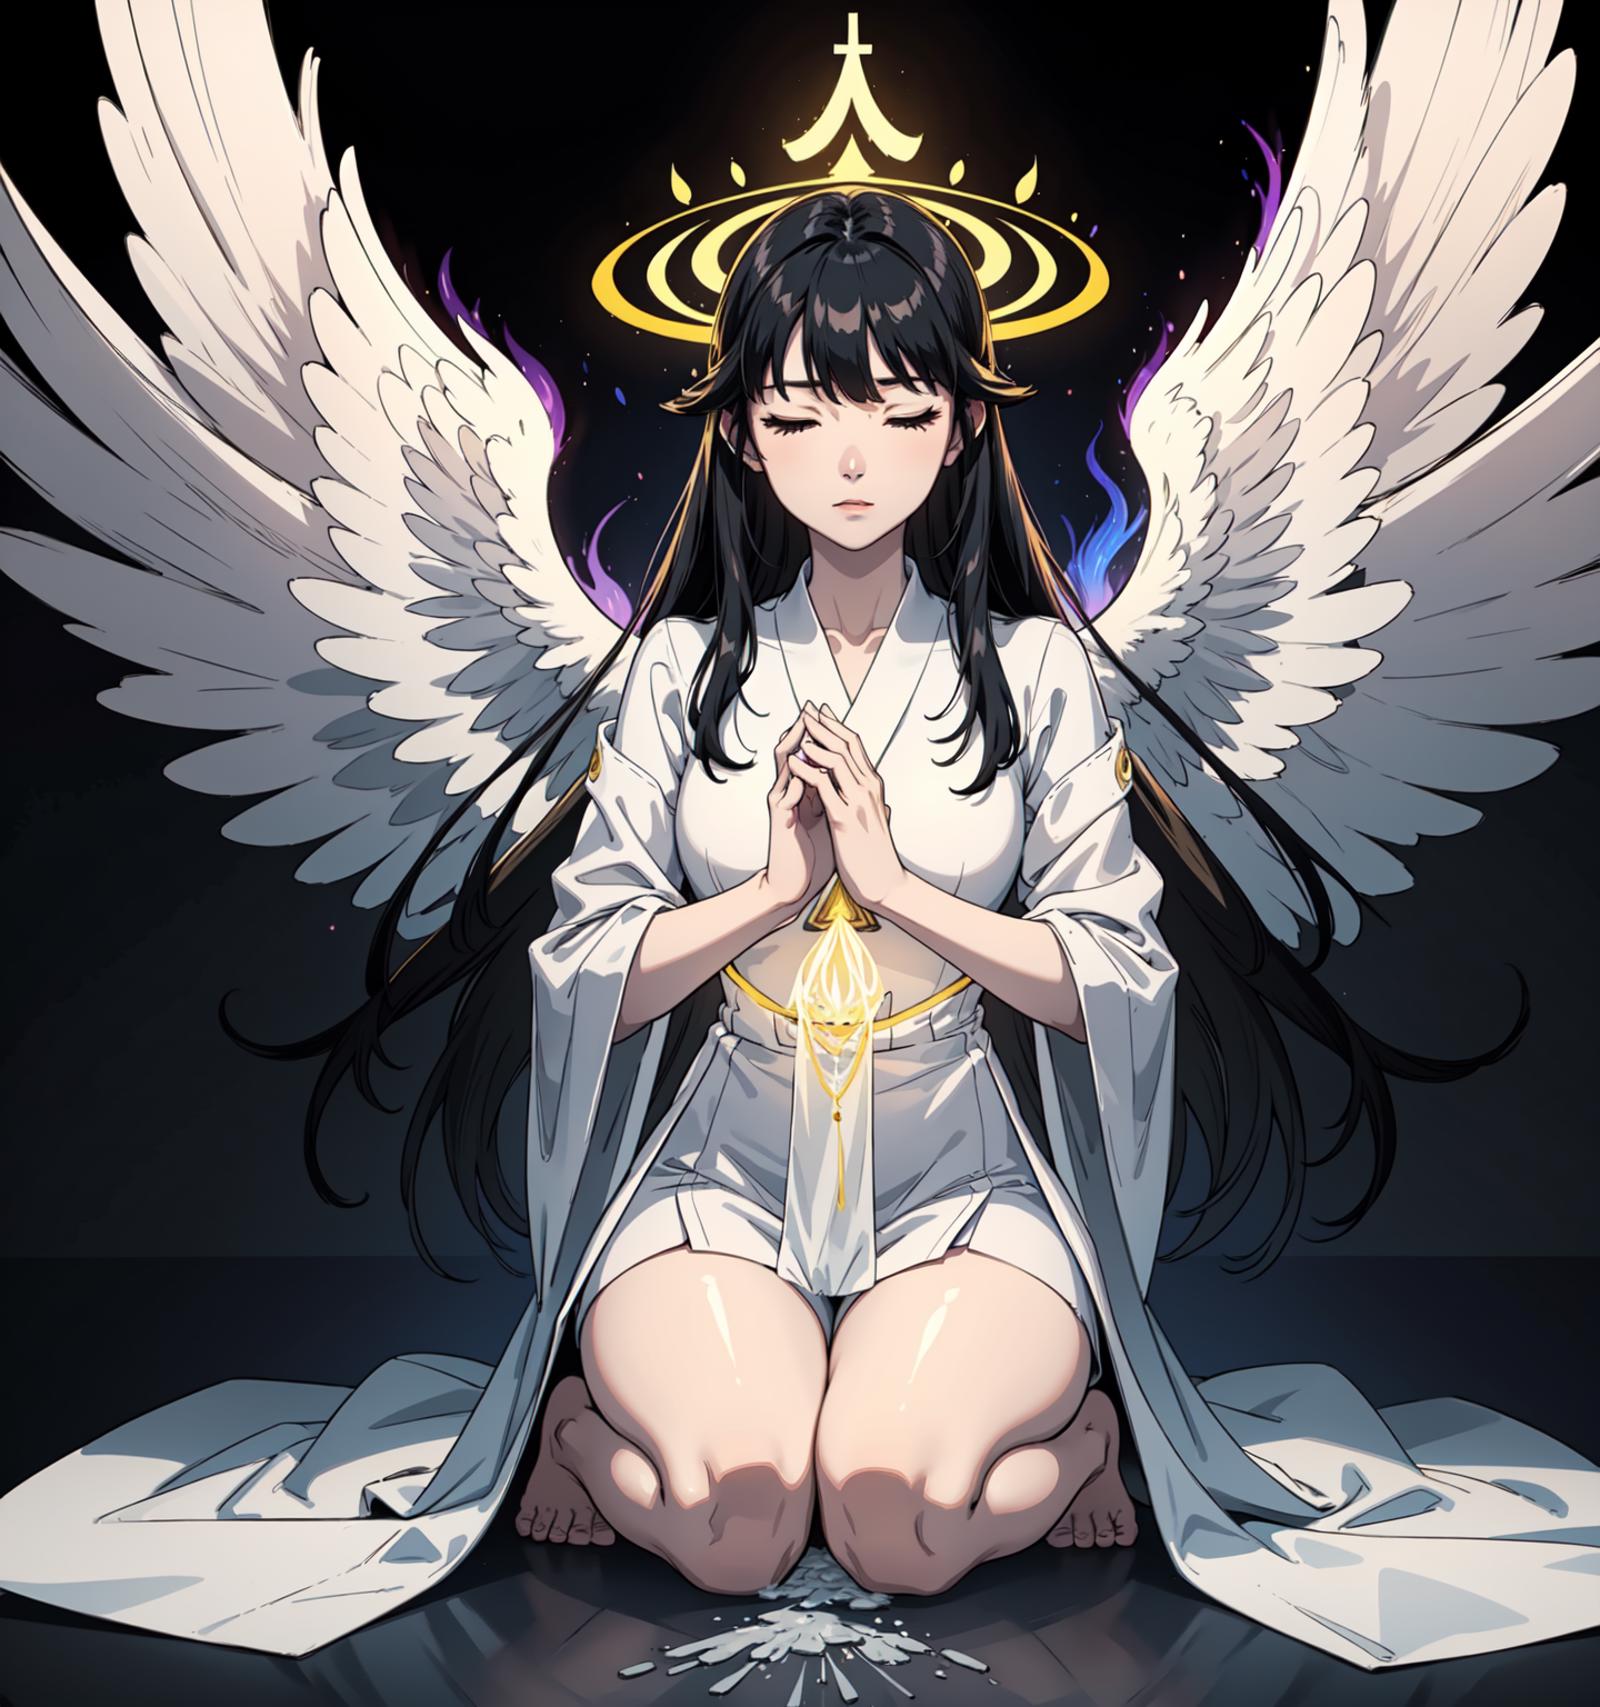 A Cartoonish Angelic Figure Sitting in Prayer with a Halo and Wings.